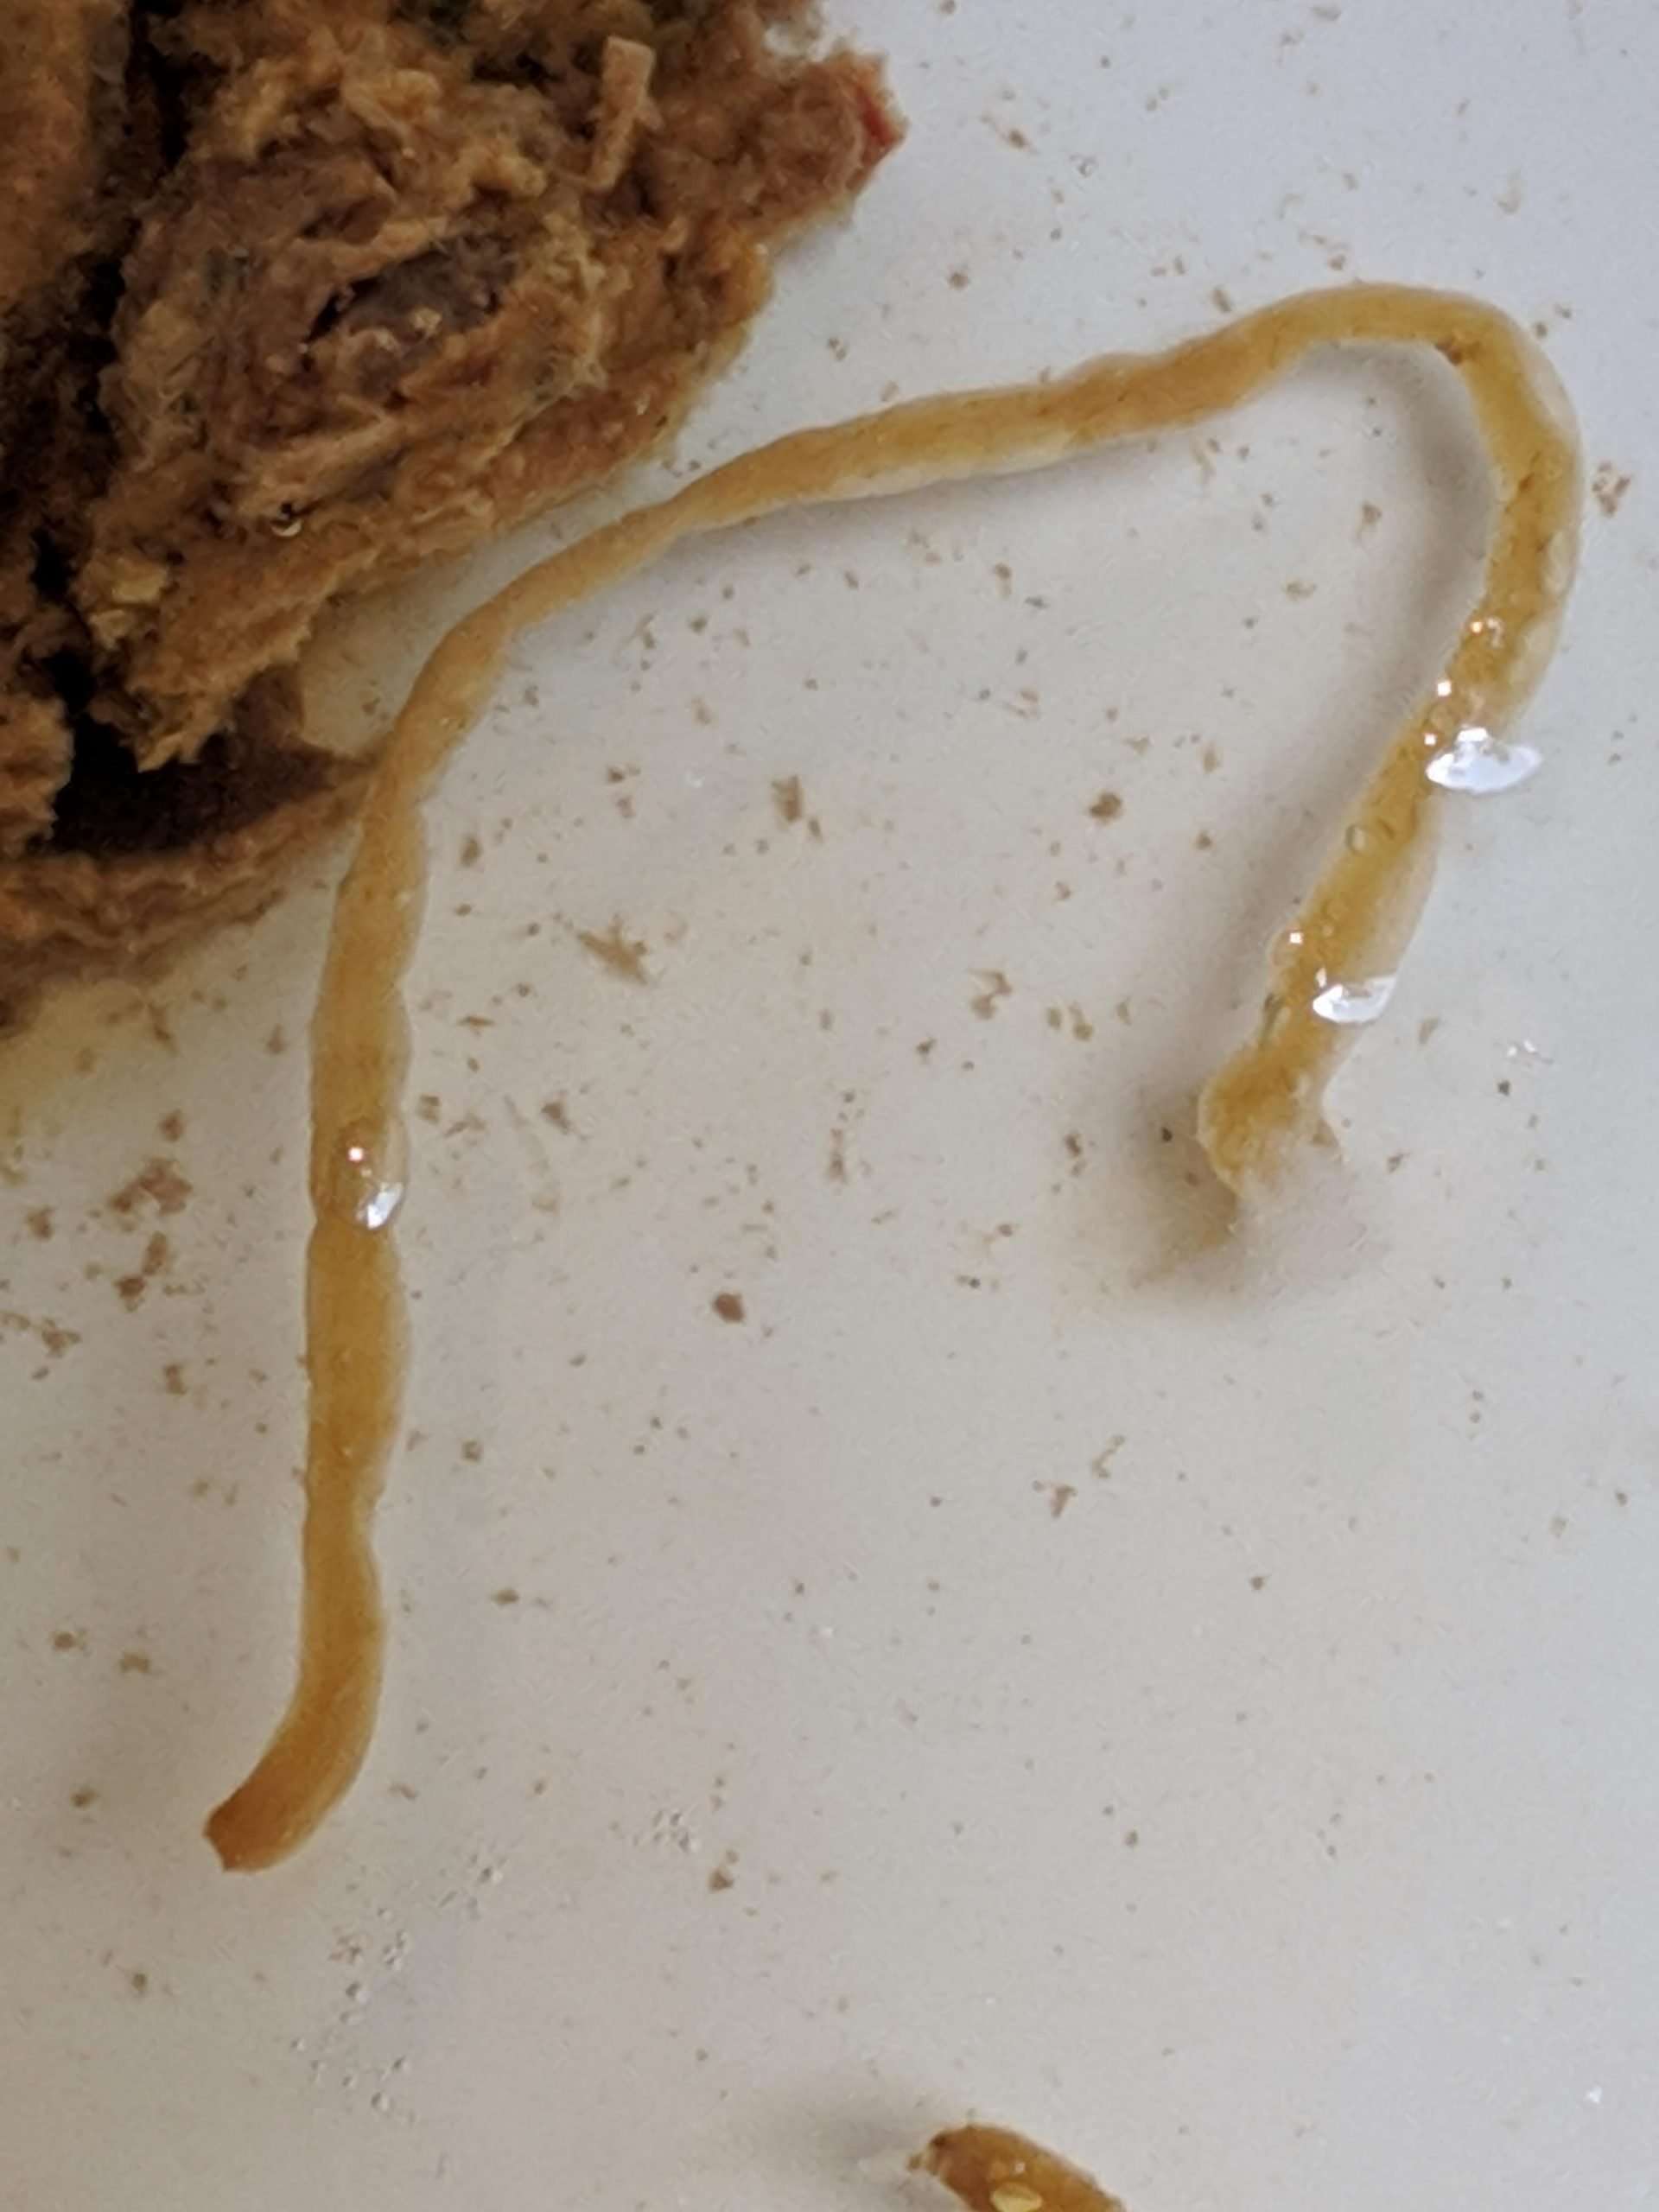 My boyfriend found this in his poop, tapeworm? : medical ...